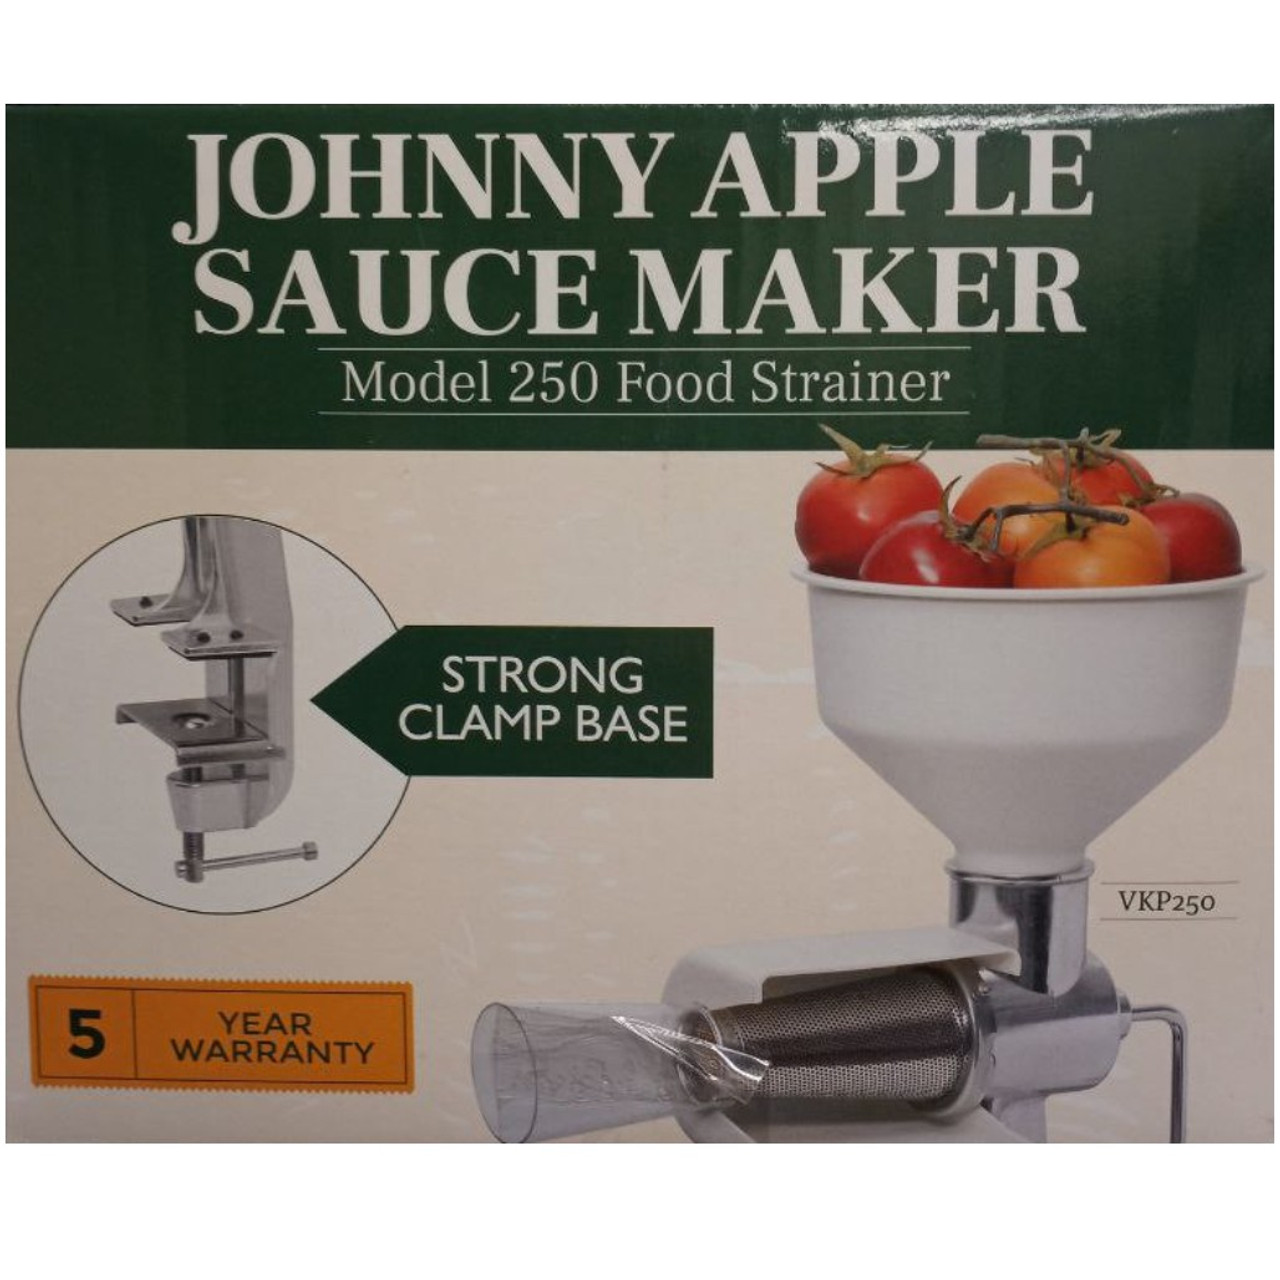 https://cdn11.bigcommerce.com/s-x8y6yj0di0/images/stencil/1280x1280/products/389/620/Johnny_Apple_Sauce_Maker_top__84145.1610748916.jpg?c=1